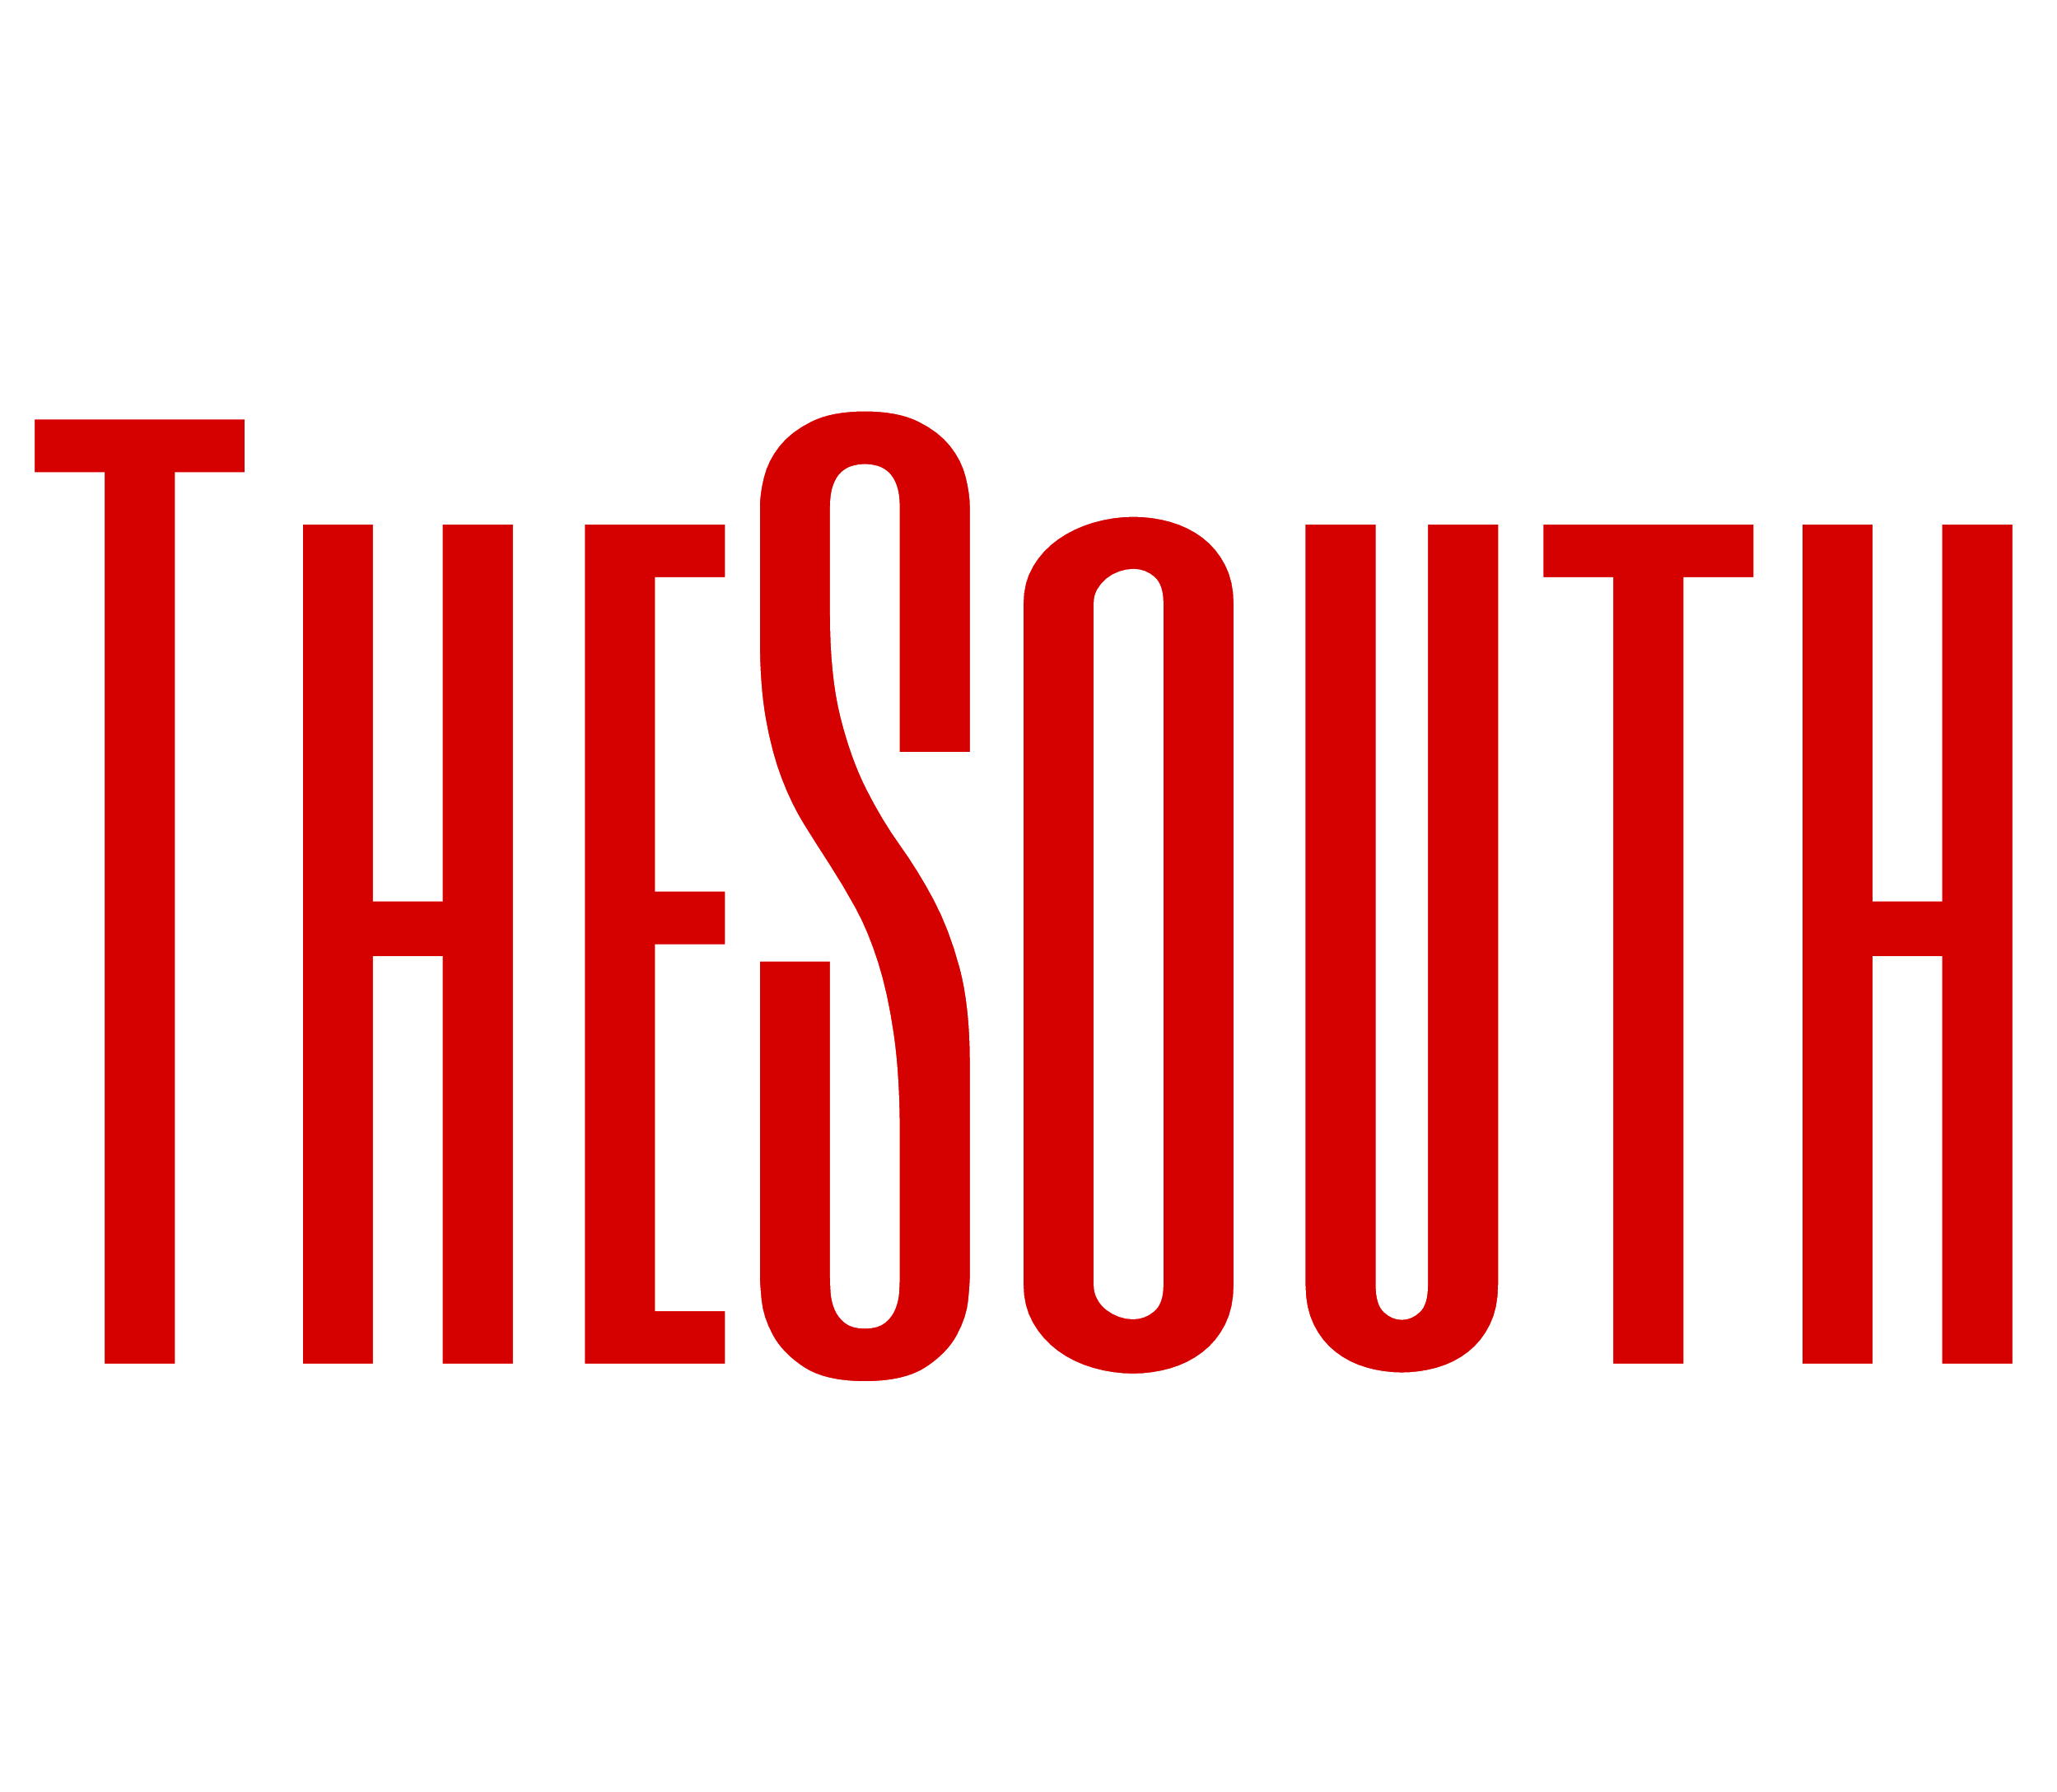 TheSouth